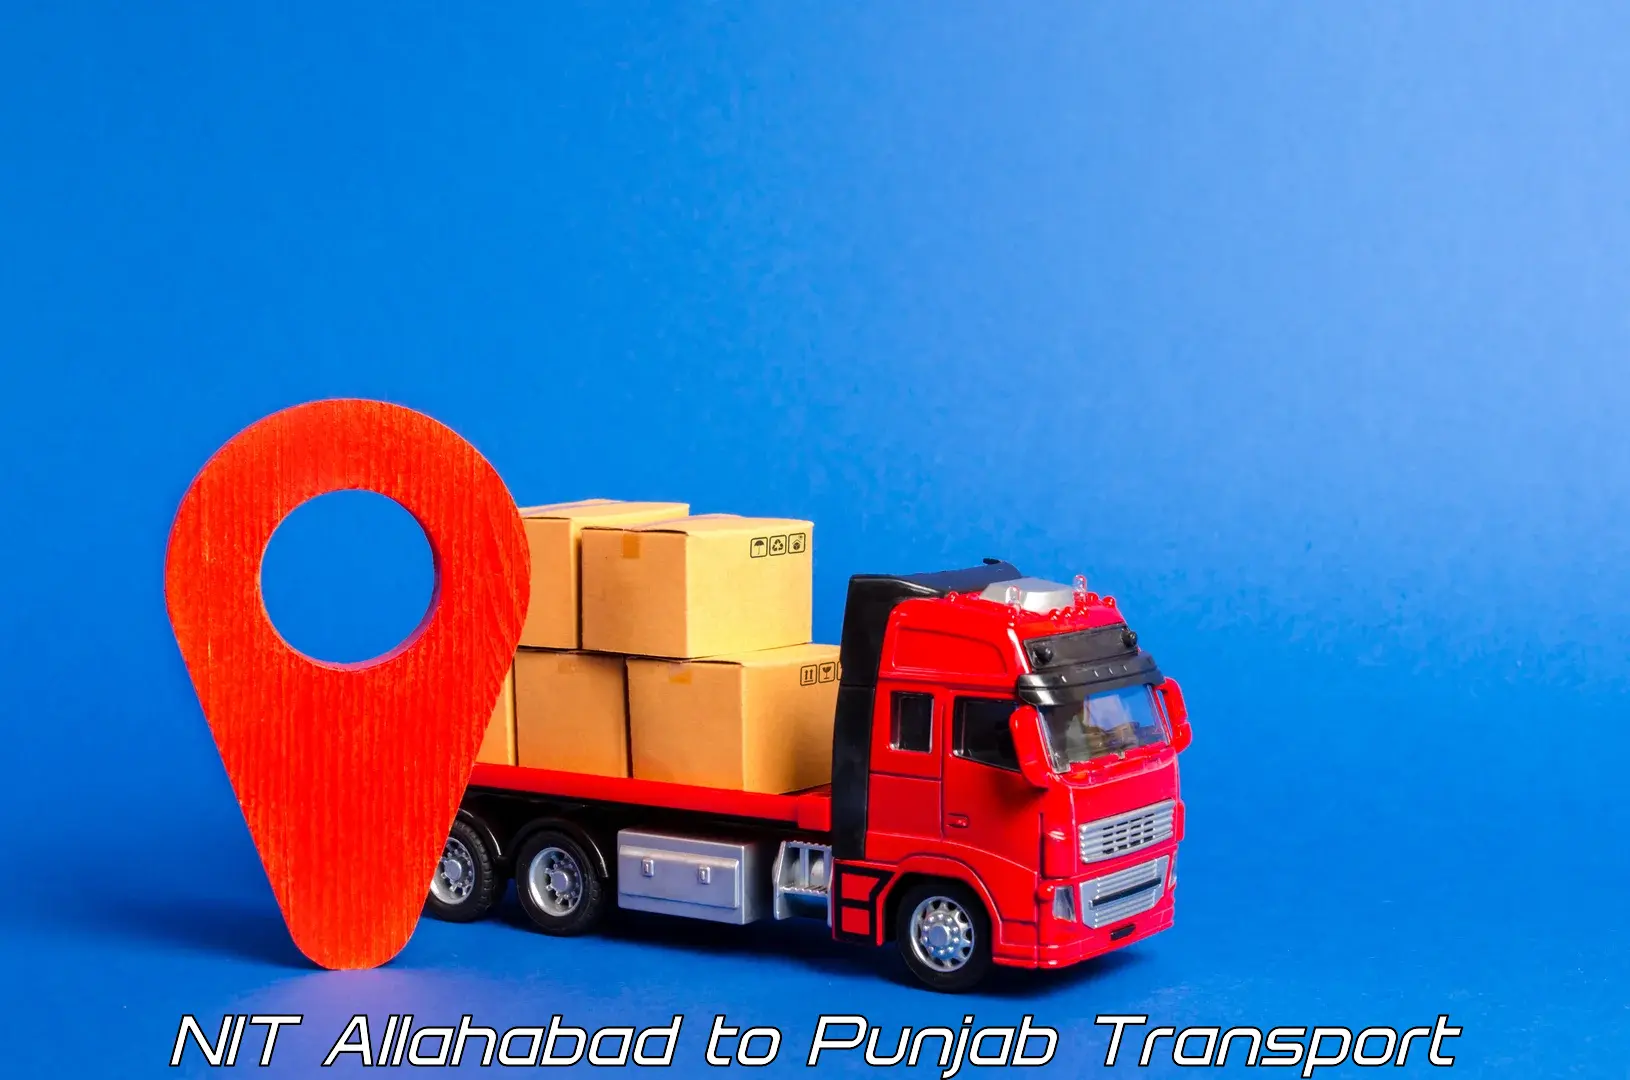 Two wheeler parcel service NIT Allahabad to Patiala